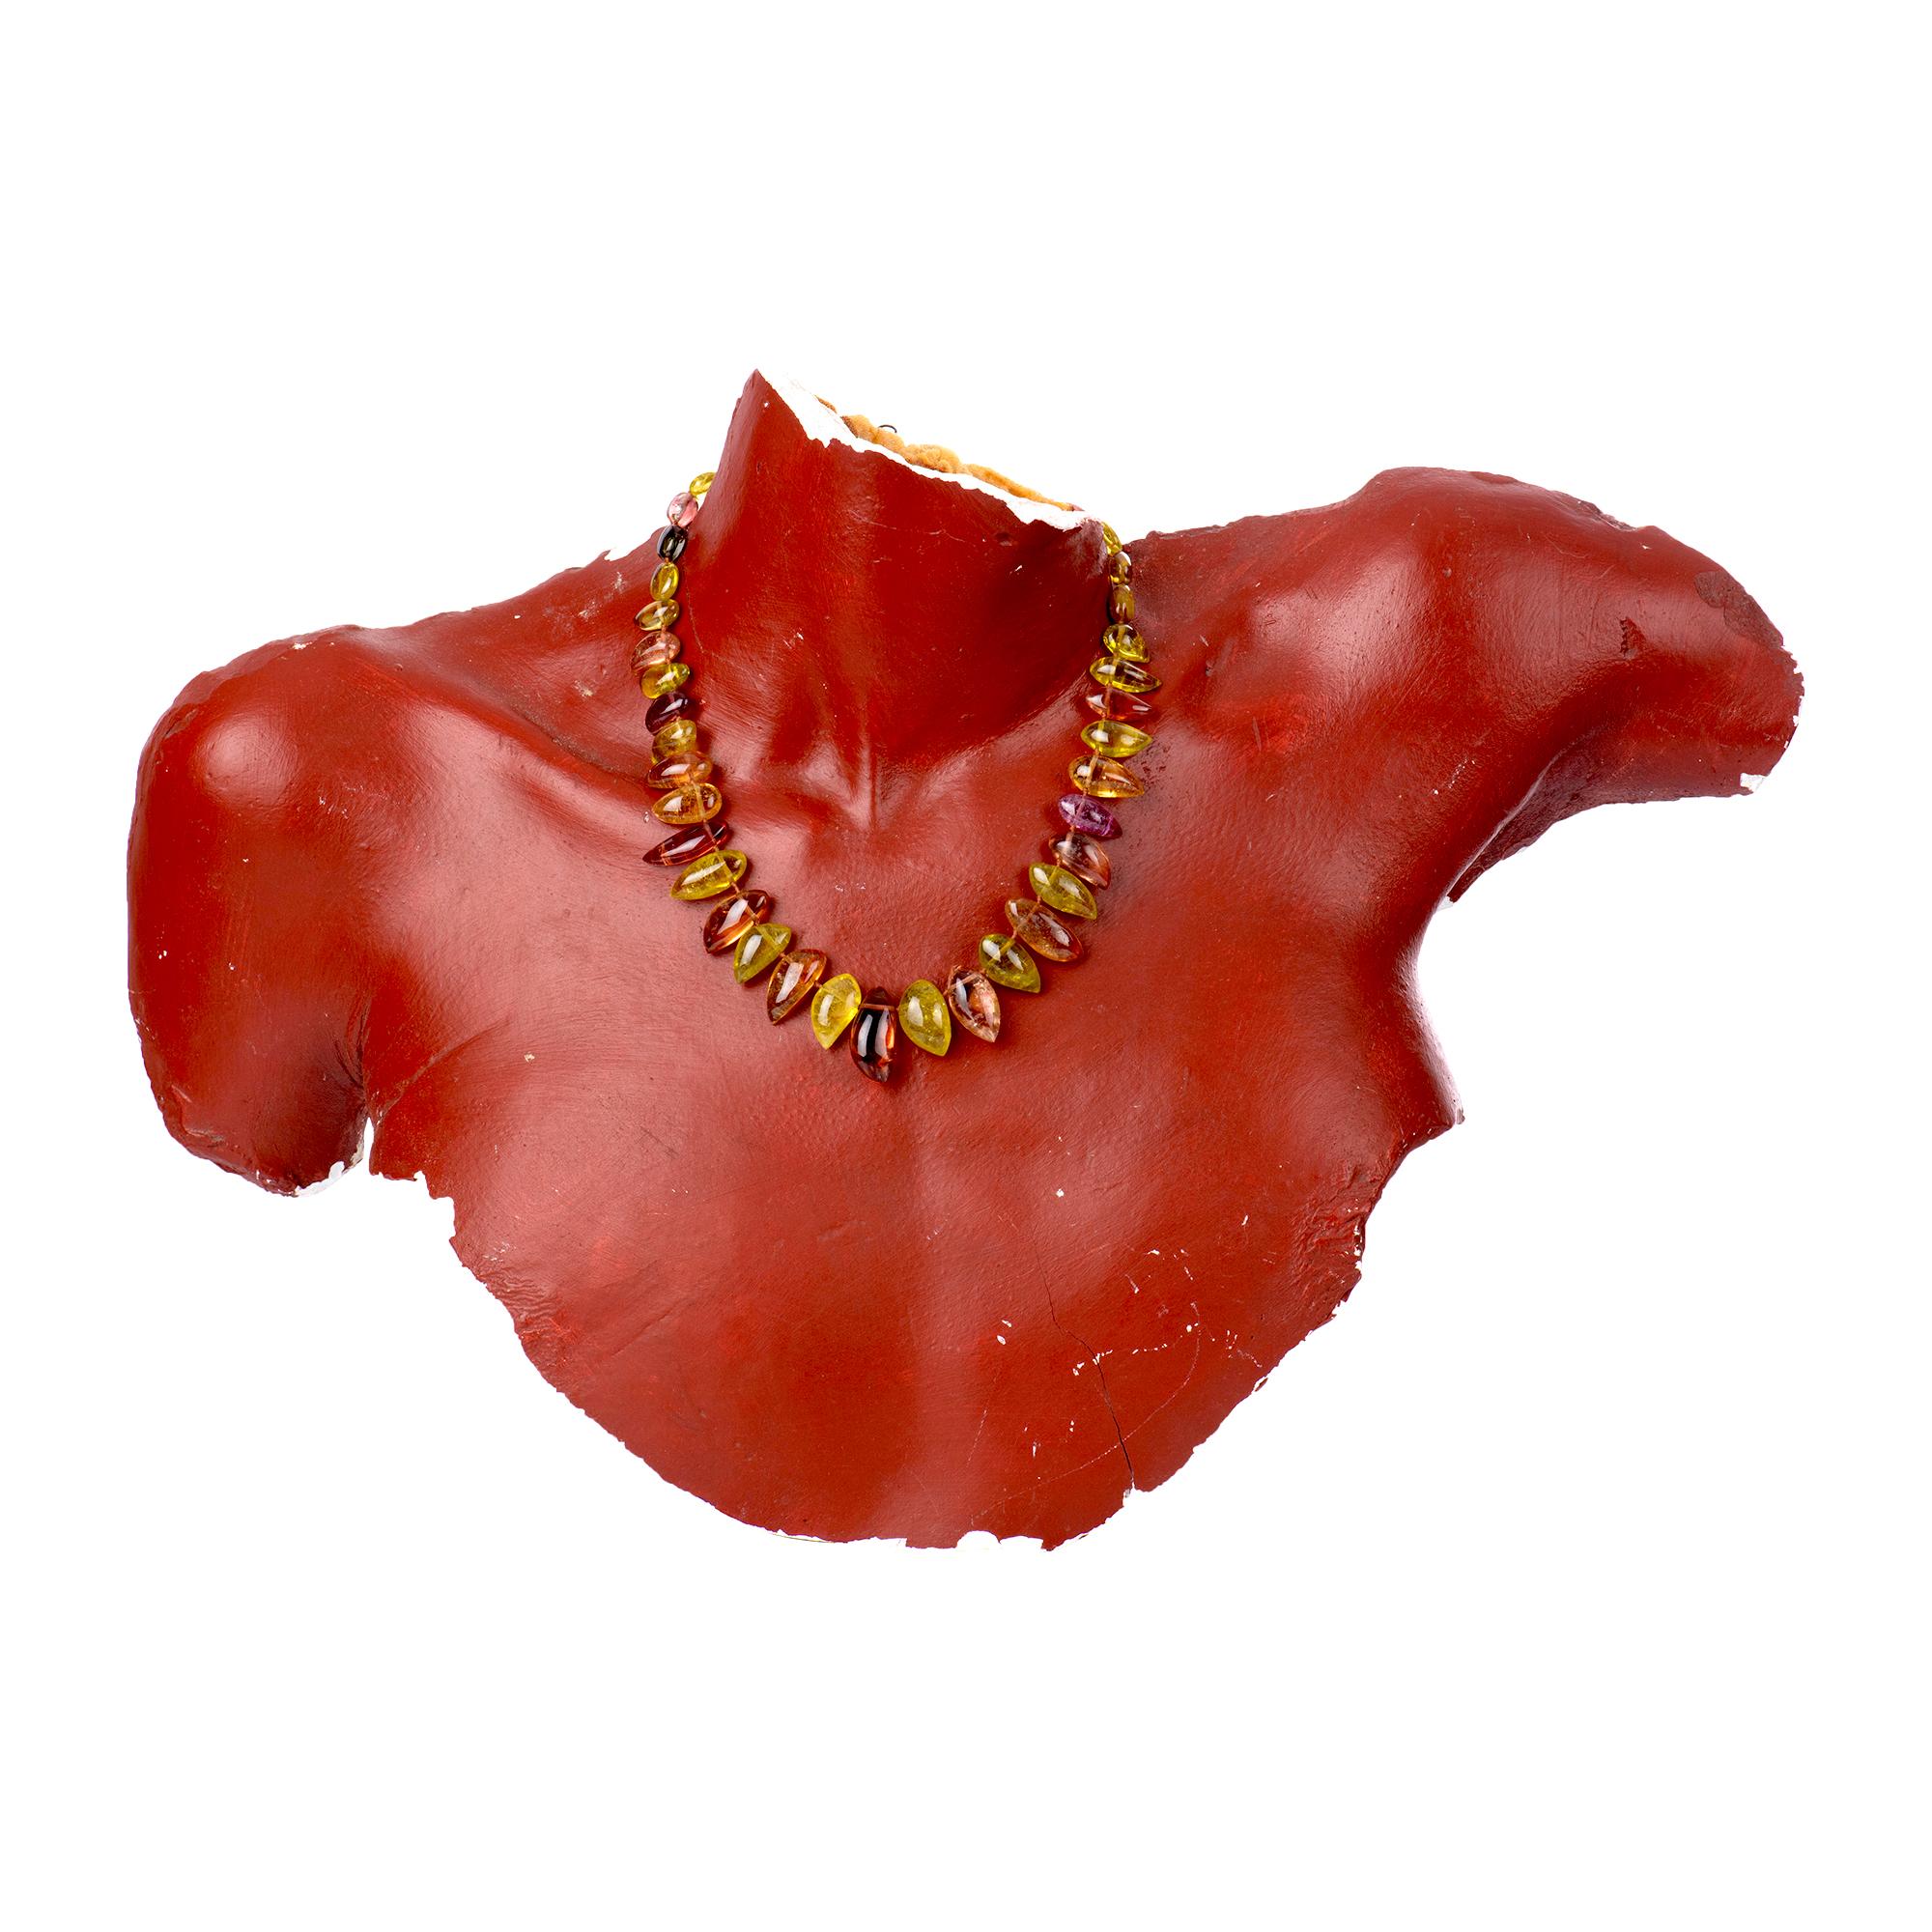 Fire and sunlight will dance around your neck when you don this stunning 18-inch necklace of paisley- and oval-shaped tourmaline beads, Colors range from lime, chartreuse and apricot to sweet shades of watermelon and rose. Clasped with Gabrielle's